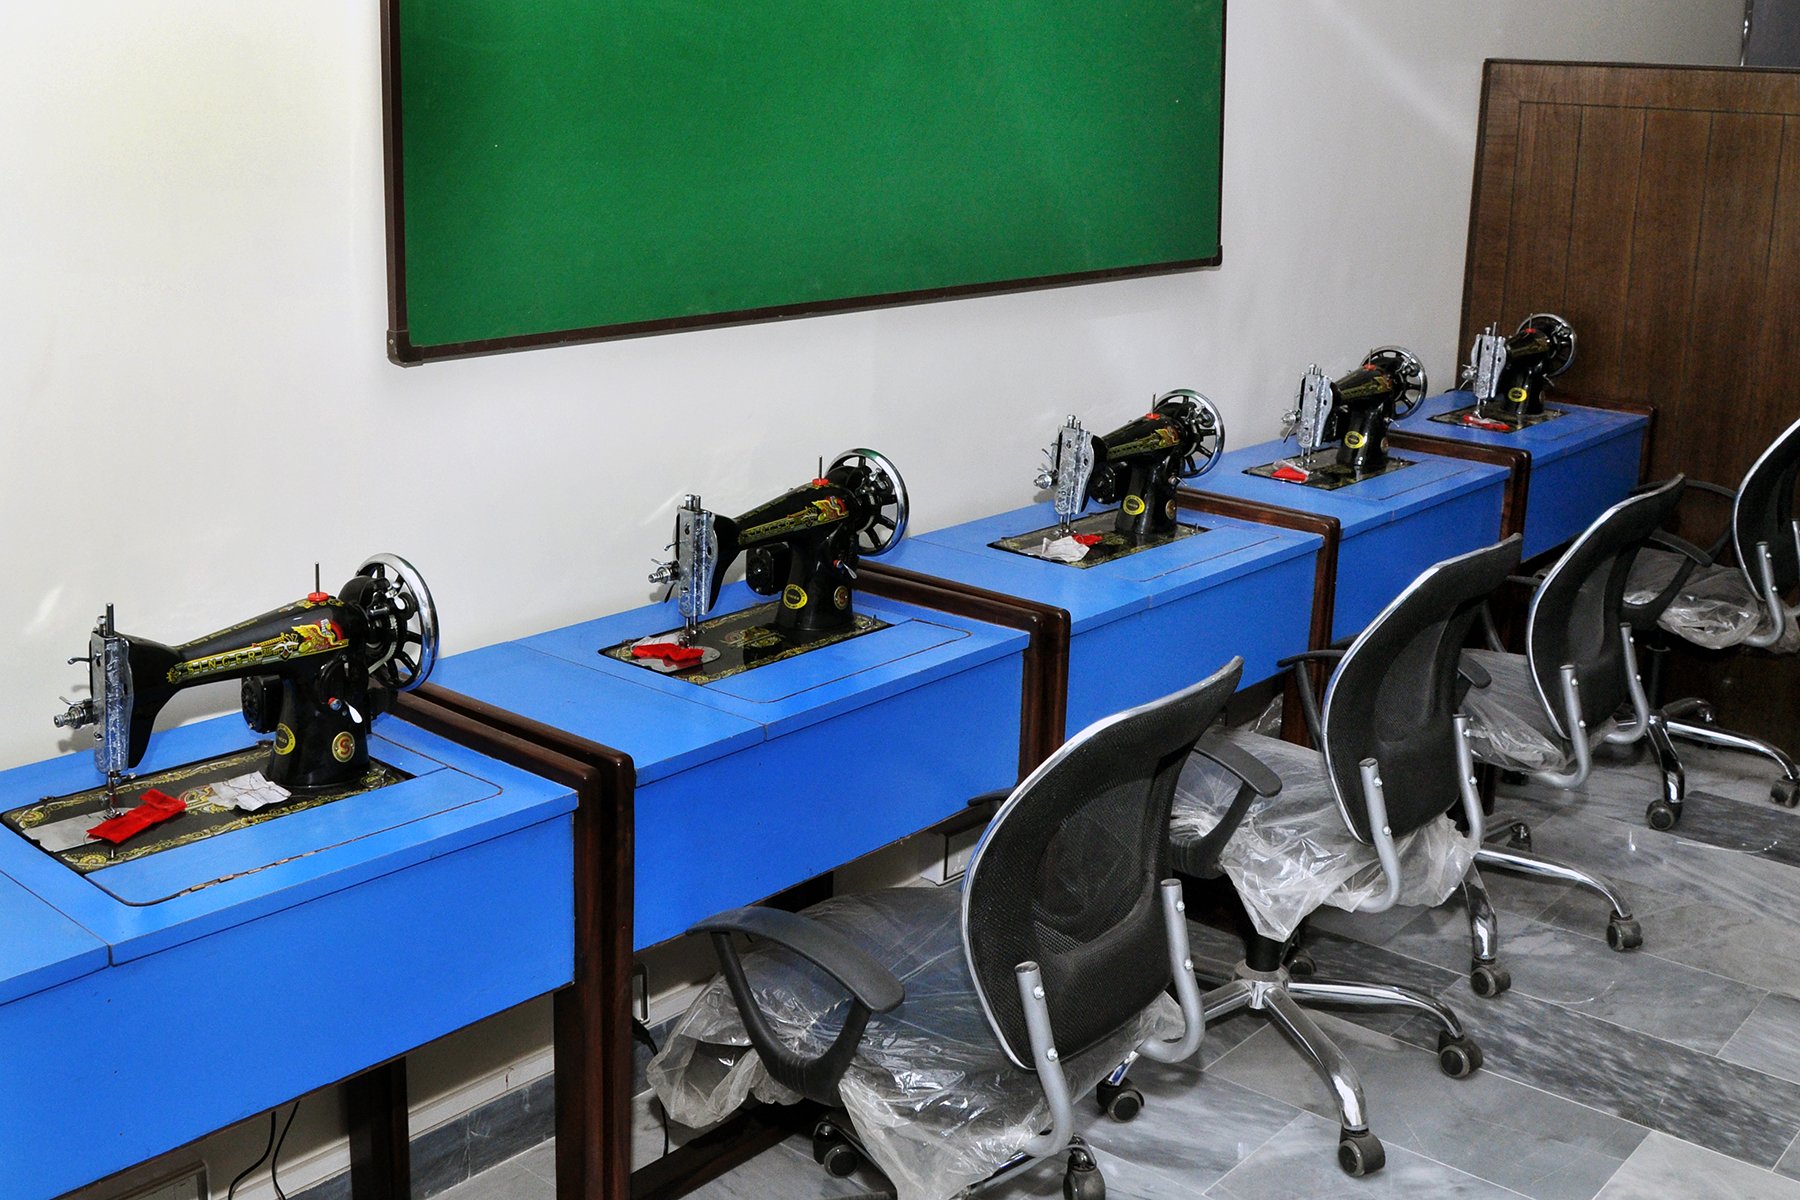 Equipment for skill enhancement donated by PPL at Centre of Excellence for Deaf developed by Pakistan Association of the Deaf Karachi